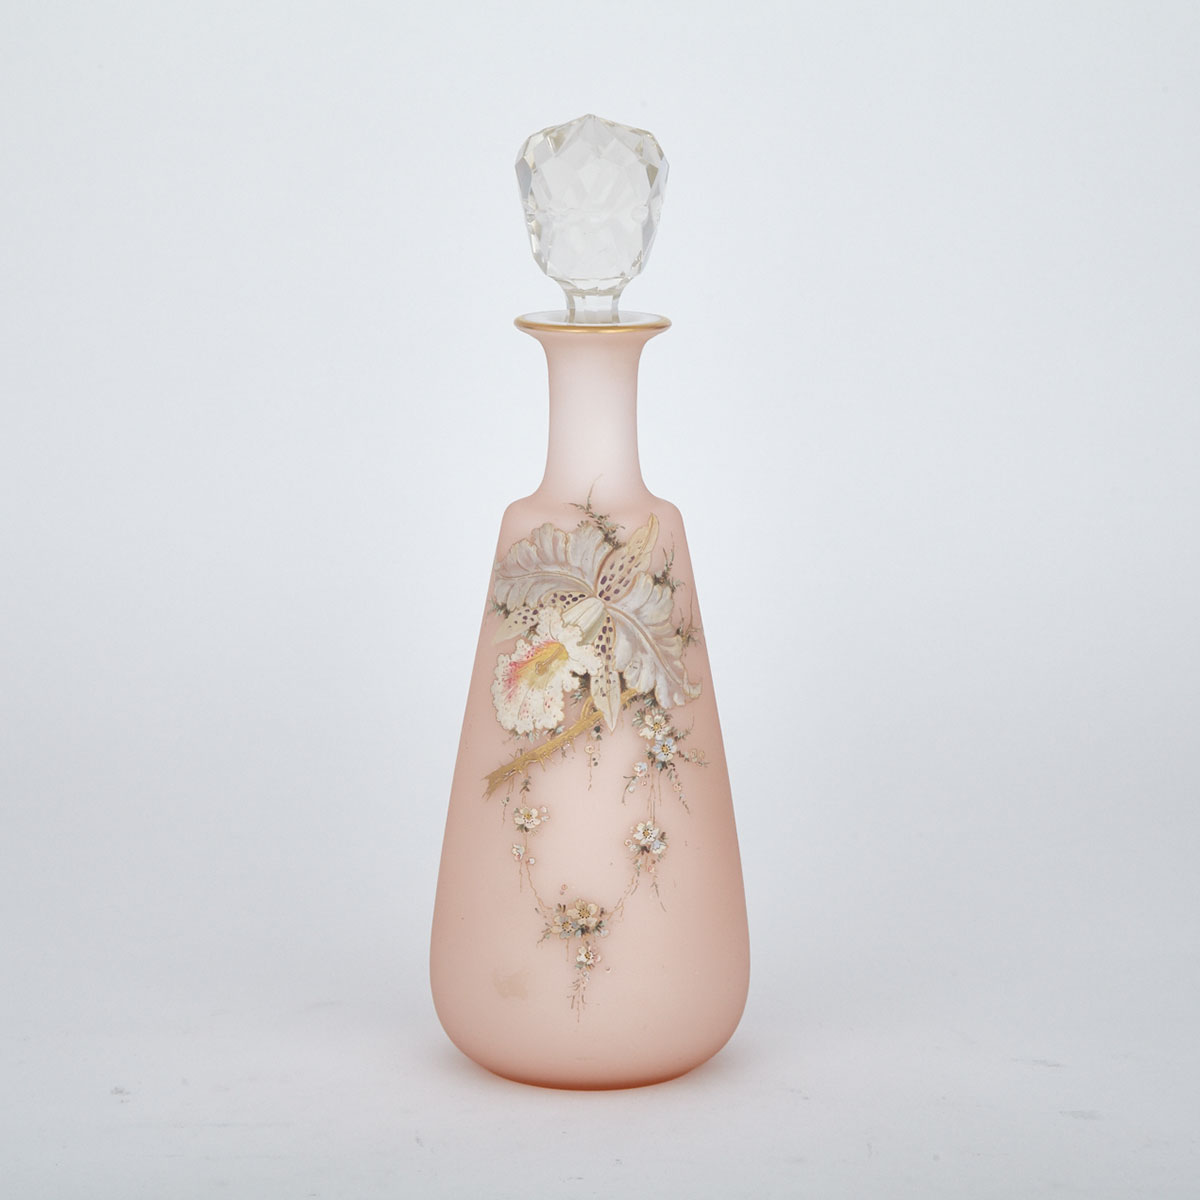 English Overlaid and Enameled Pink Glass Vase With Cut Glass Stopper, c.1880